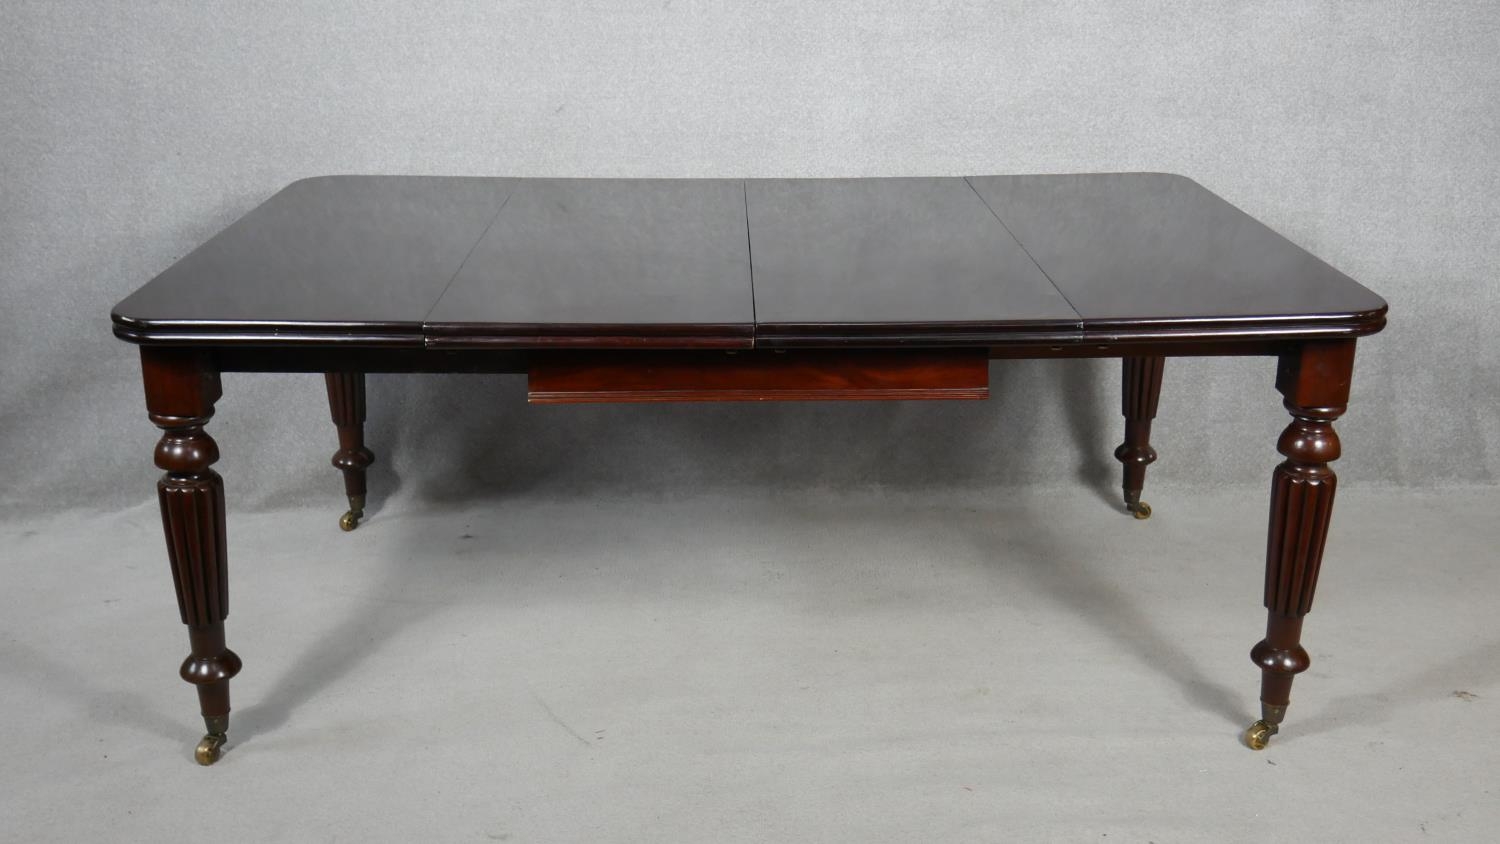 A William IV style mahogany extending dining table with two extra leaves on reeded tapering supports - Image 2 of 5